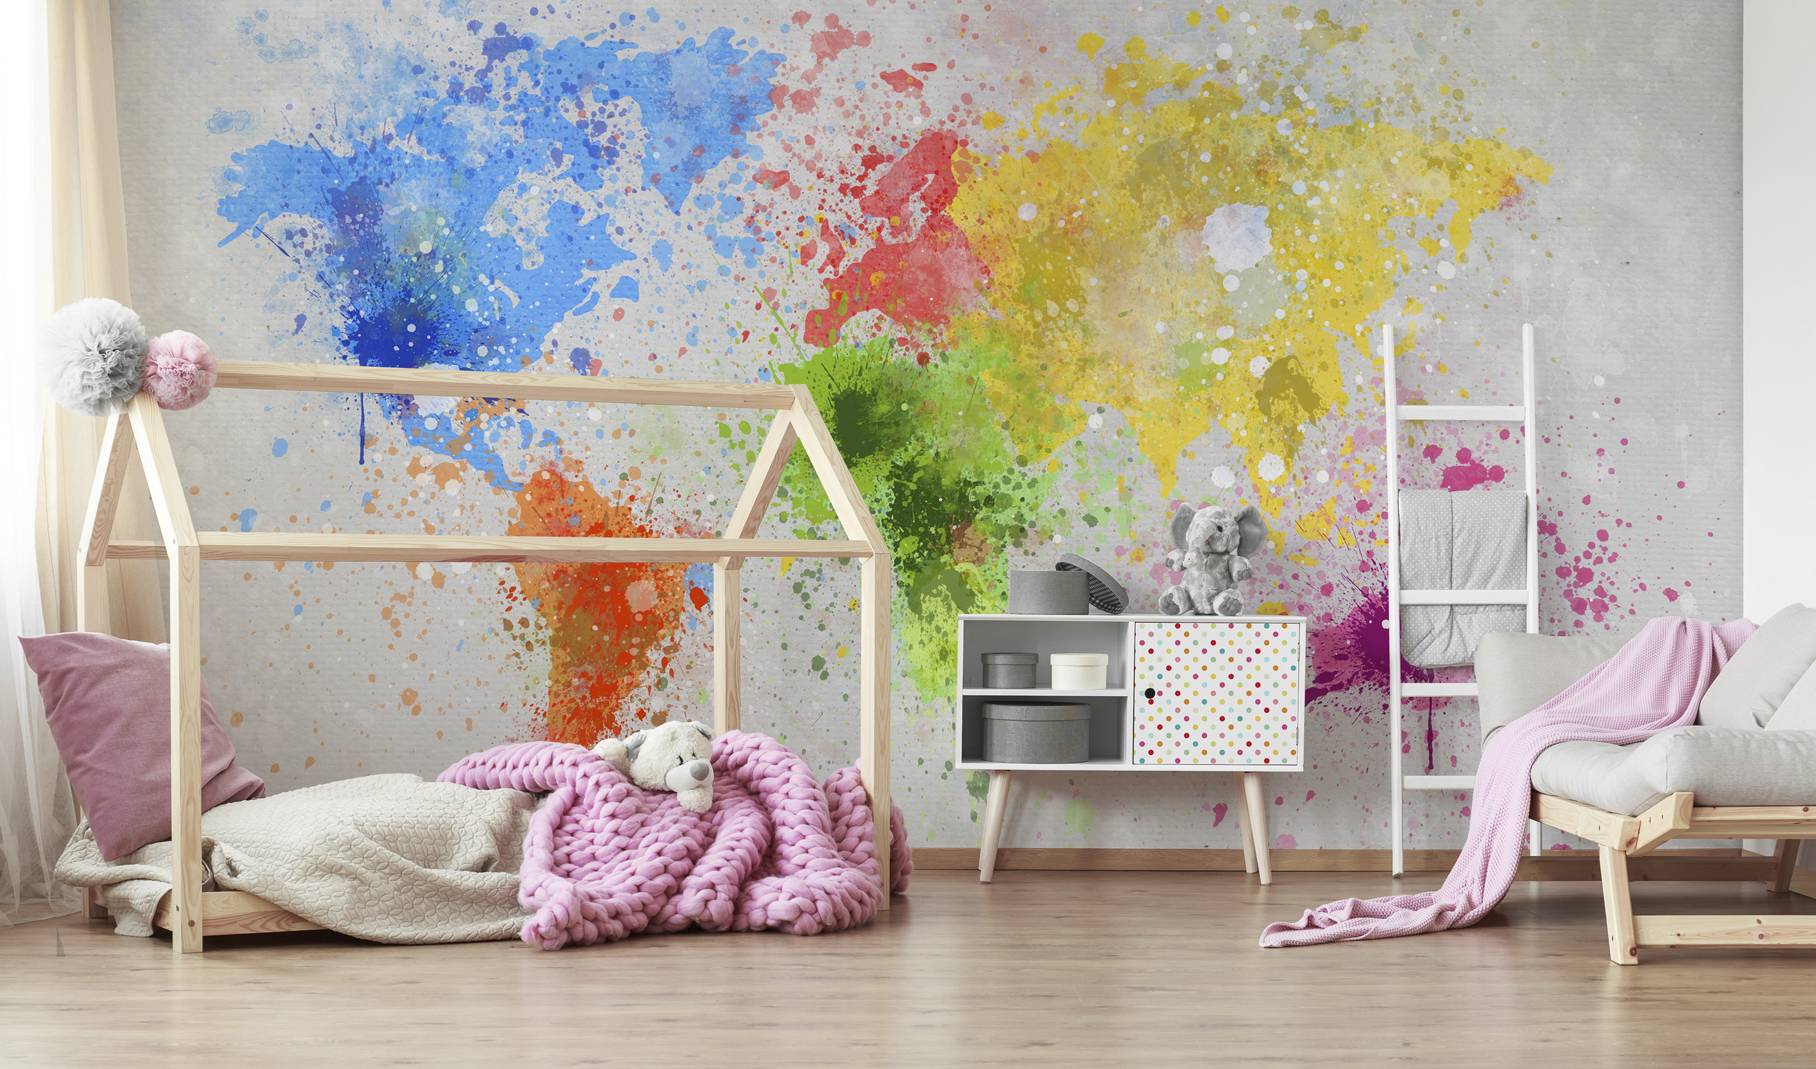 An explosion of world colors • Contemporary - Abstraction - Kids room - Wall Murals - Stickers - Maps and flags